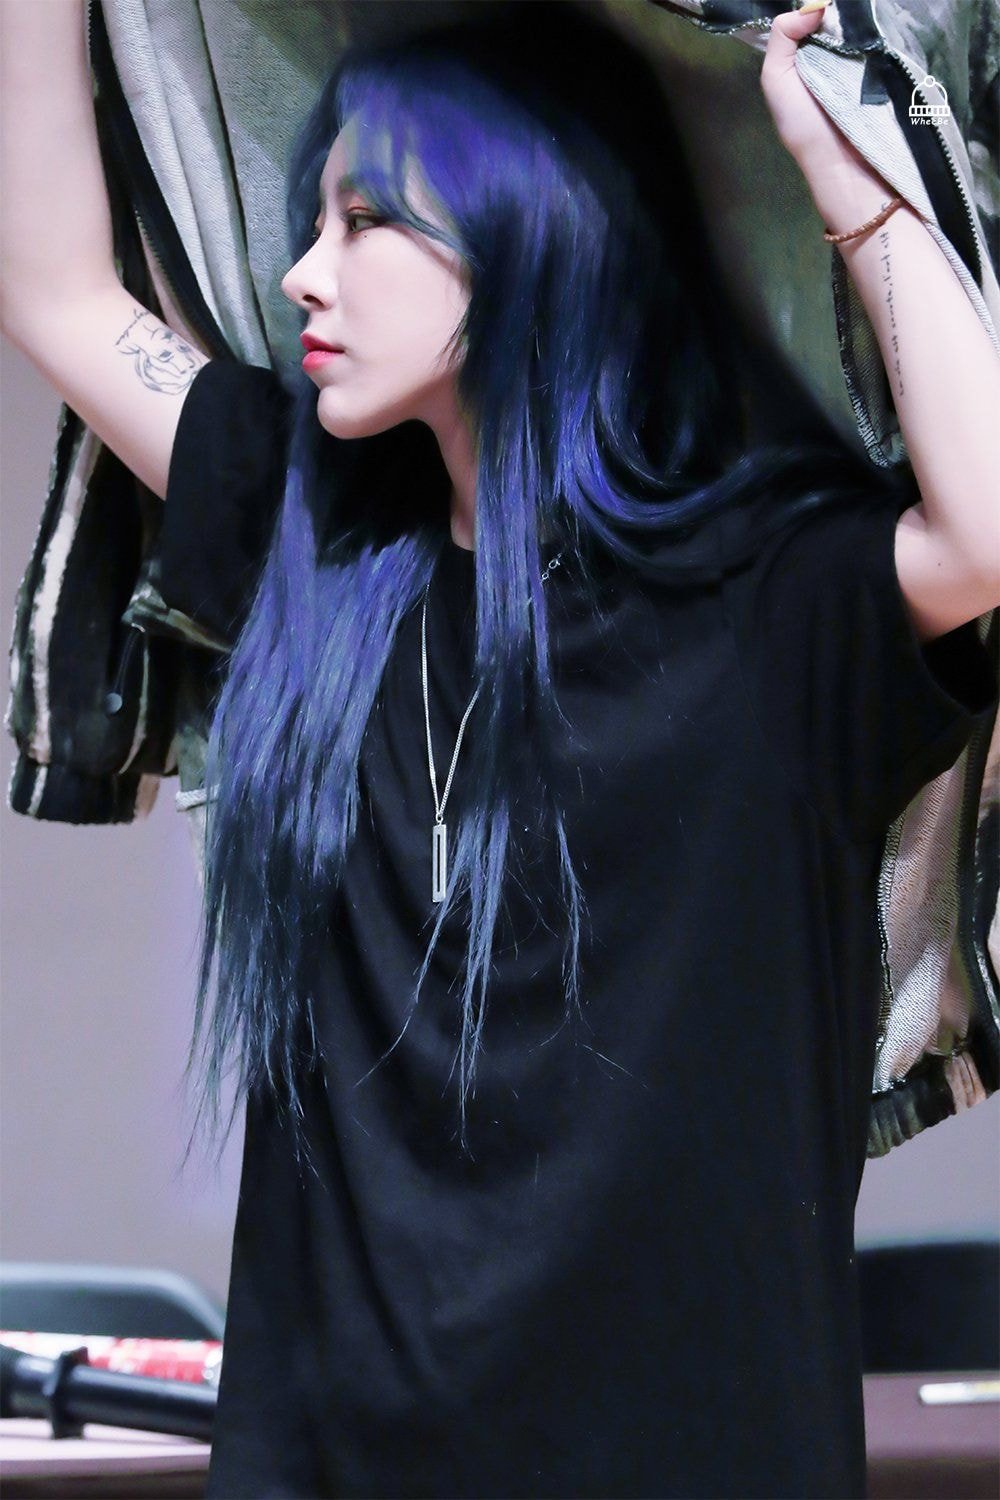 The blue haired girl